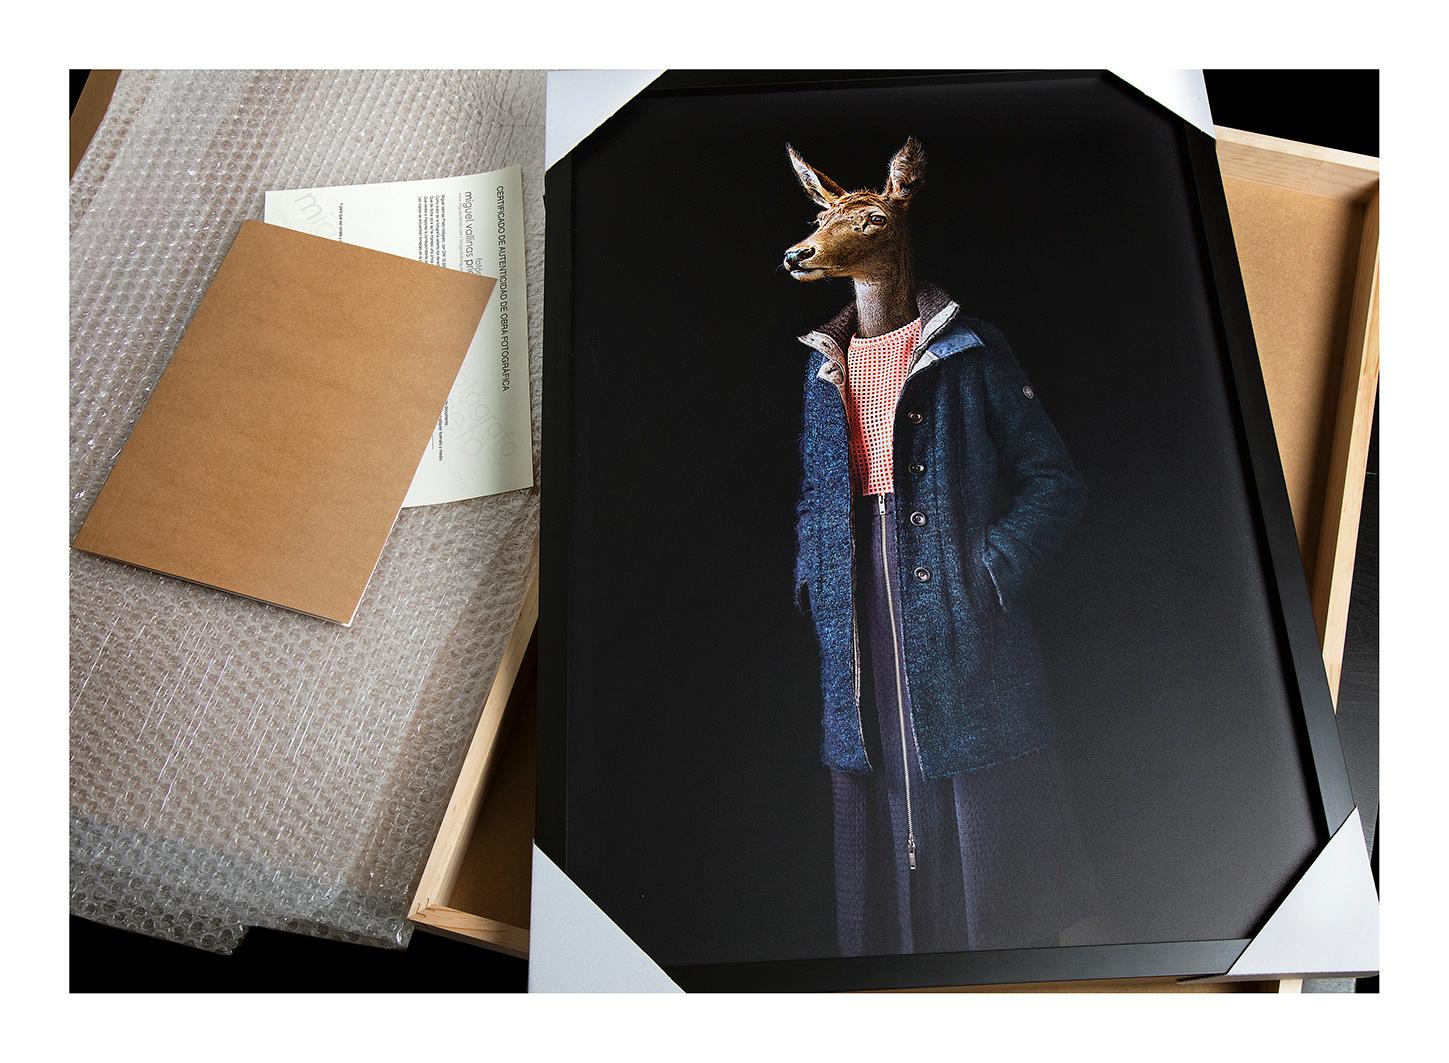 Second Skin is the fist serie of Miguel Vallinas' surreal images that reconsider the human form. Second Skin explores the concept of identity and personal choice with a connection with different animals. 
An assortment of animals, ranging from